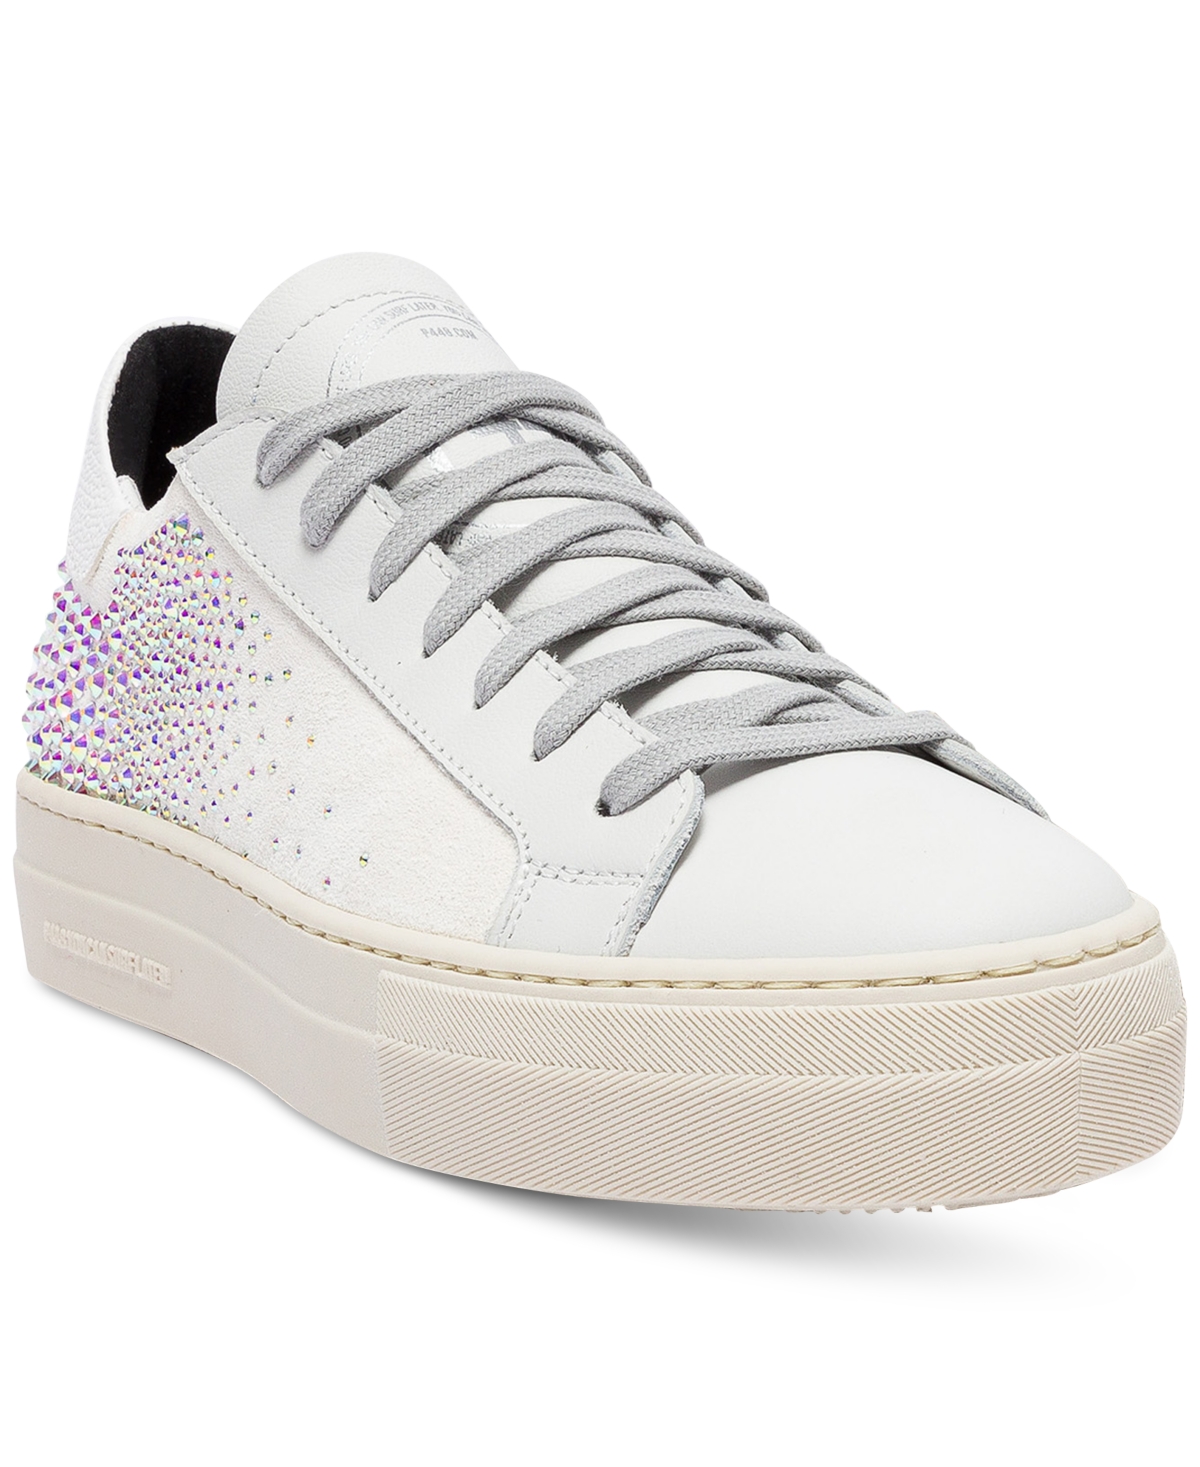 P448 Women's Thea Embellished Lace-up Low-top Sneakers In Galu